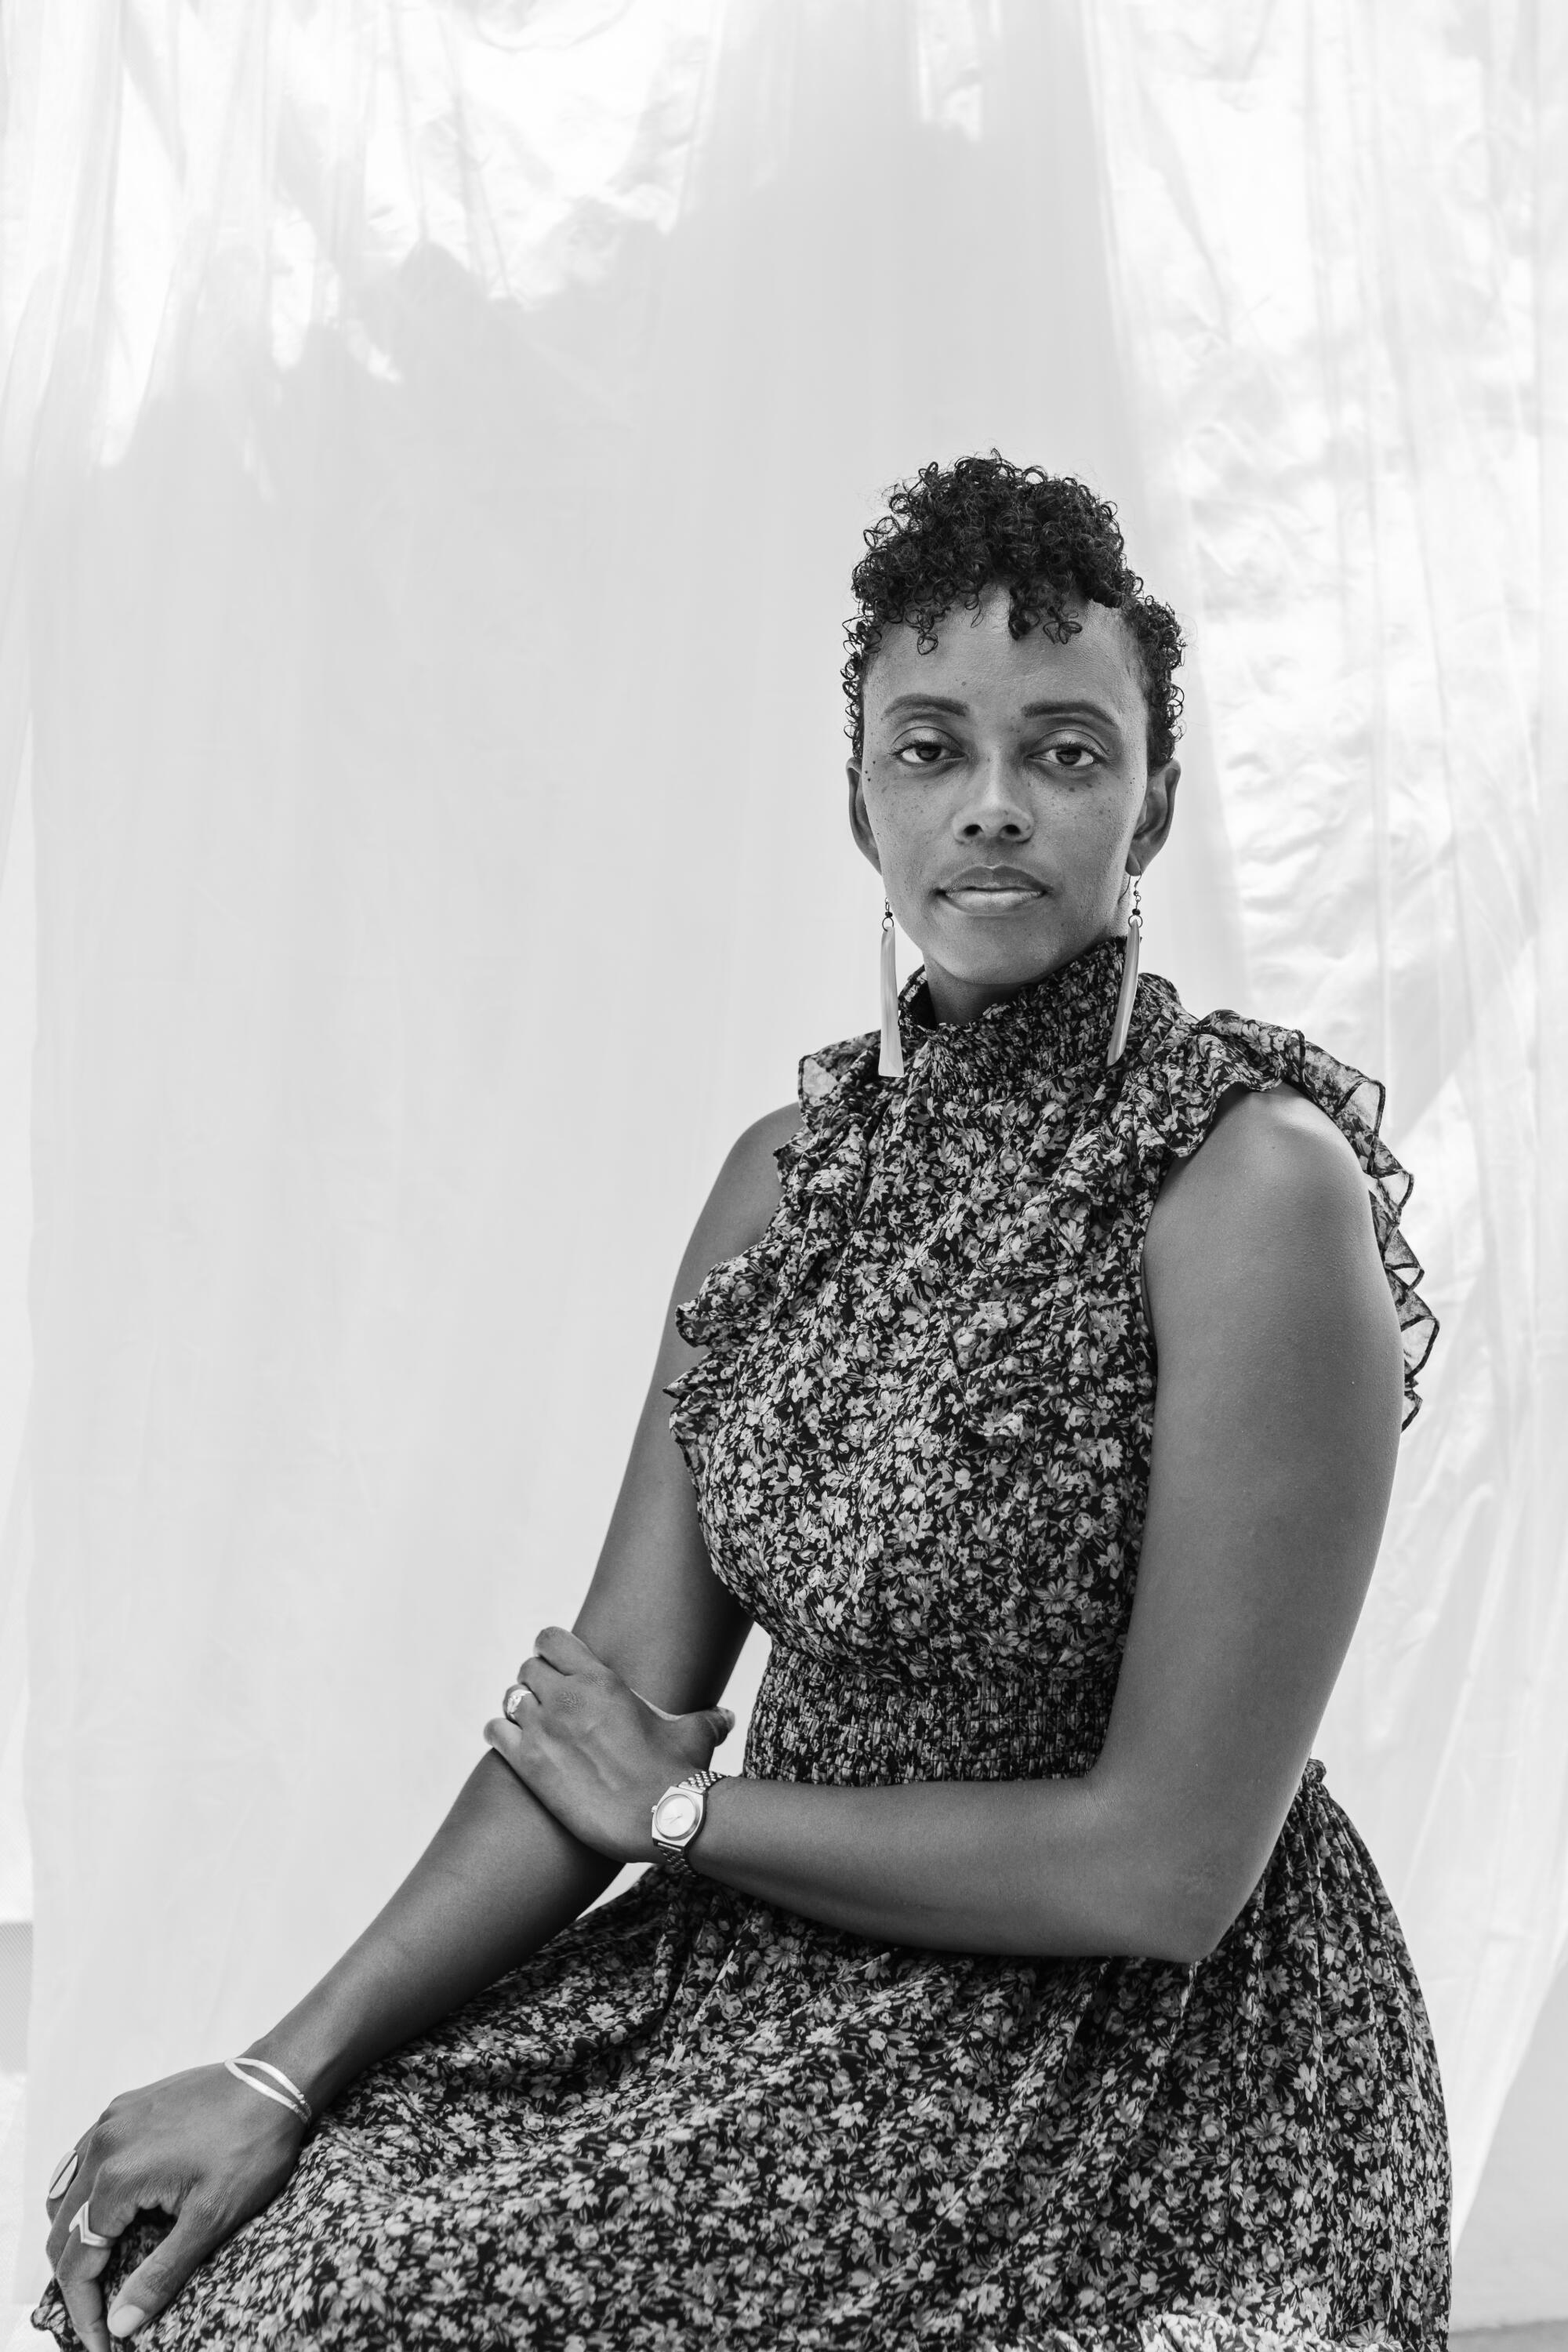 A black and white portrait of writer Angela Flournoy wearing a floral dress sitting in front of a fabric backdrop